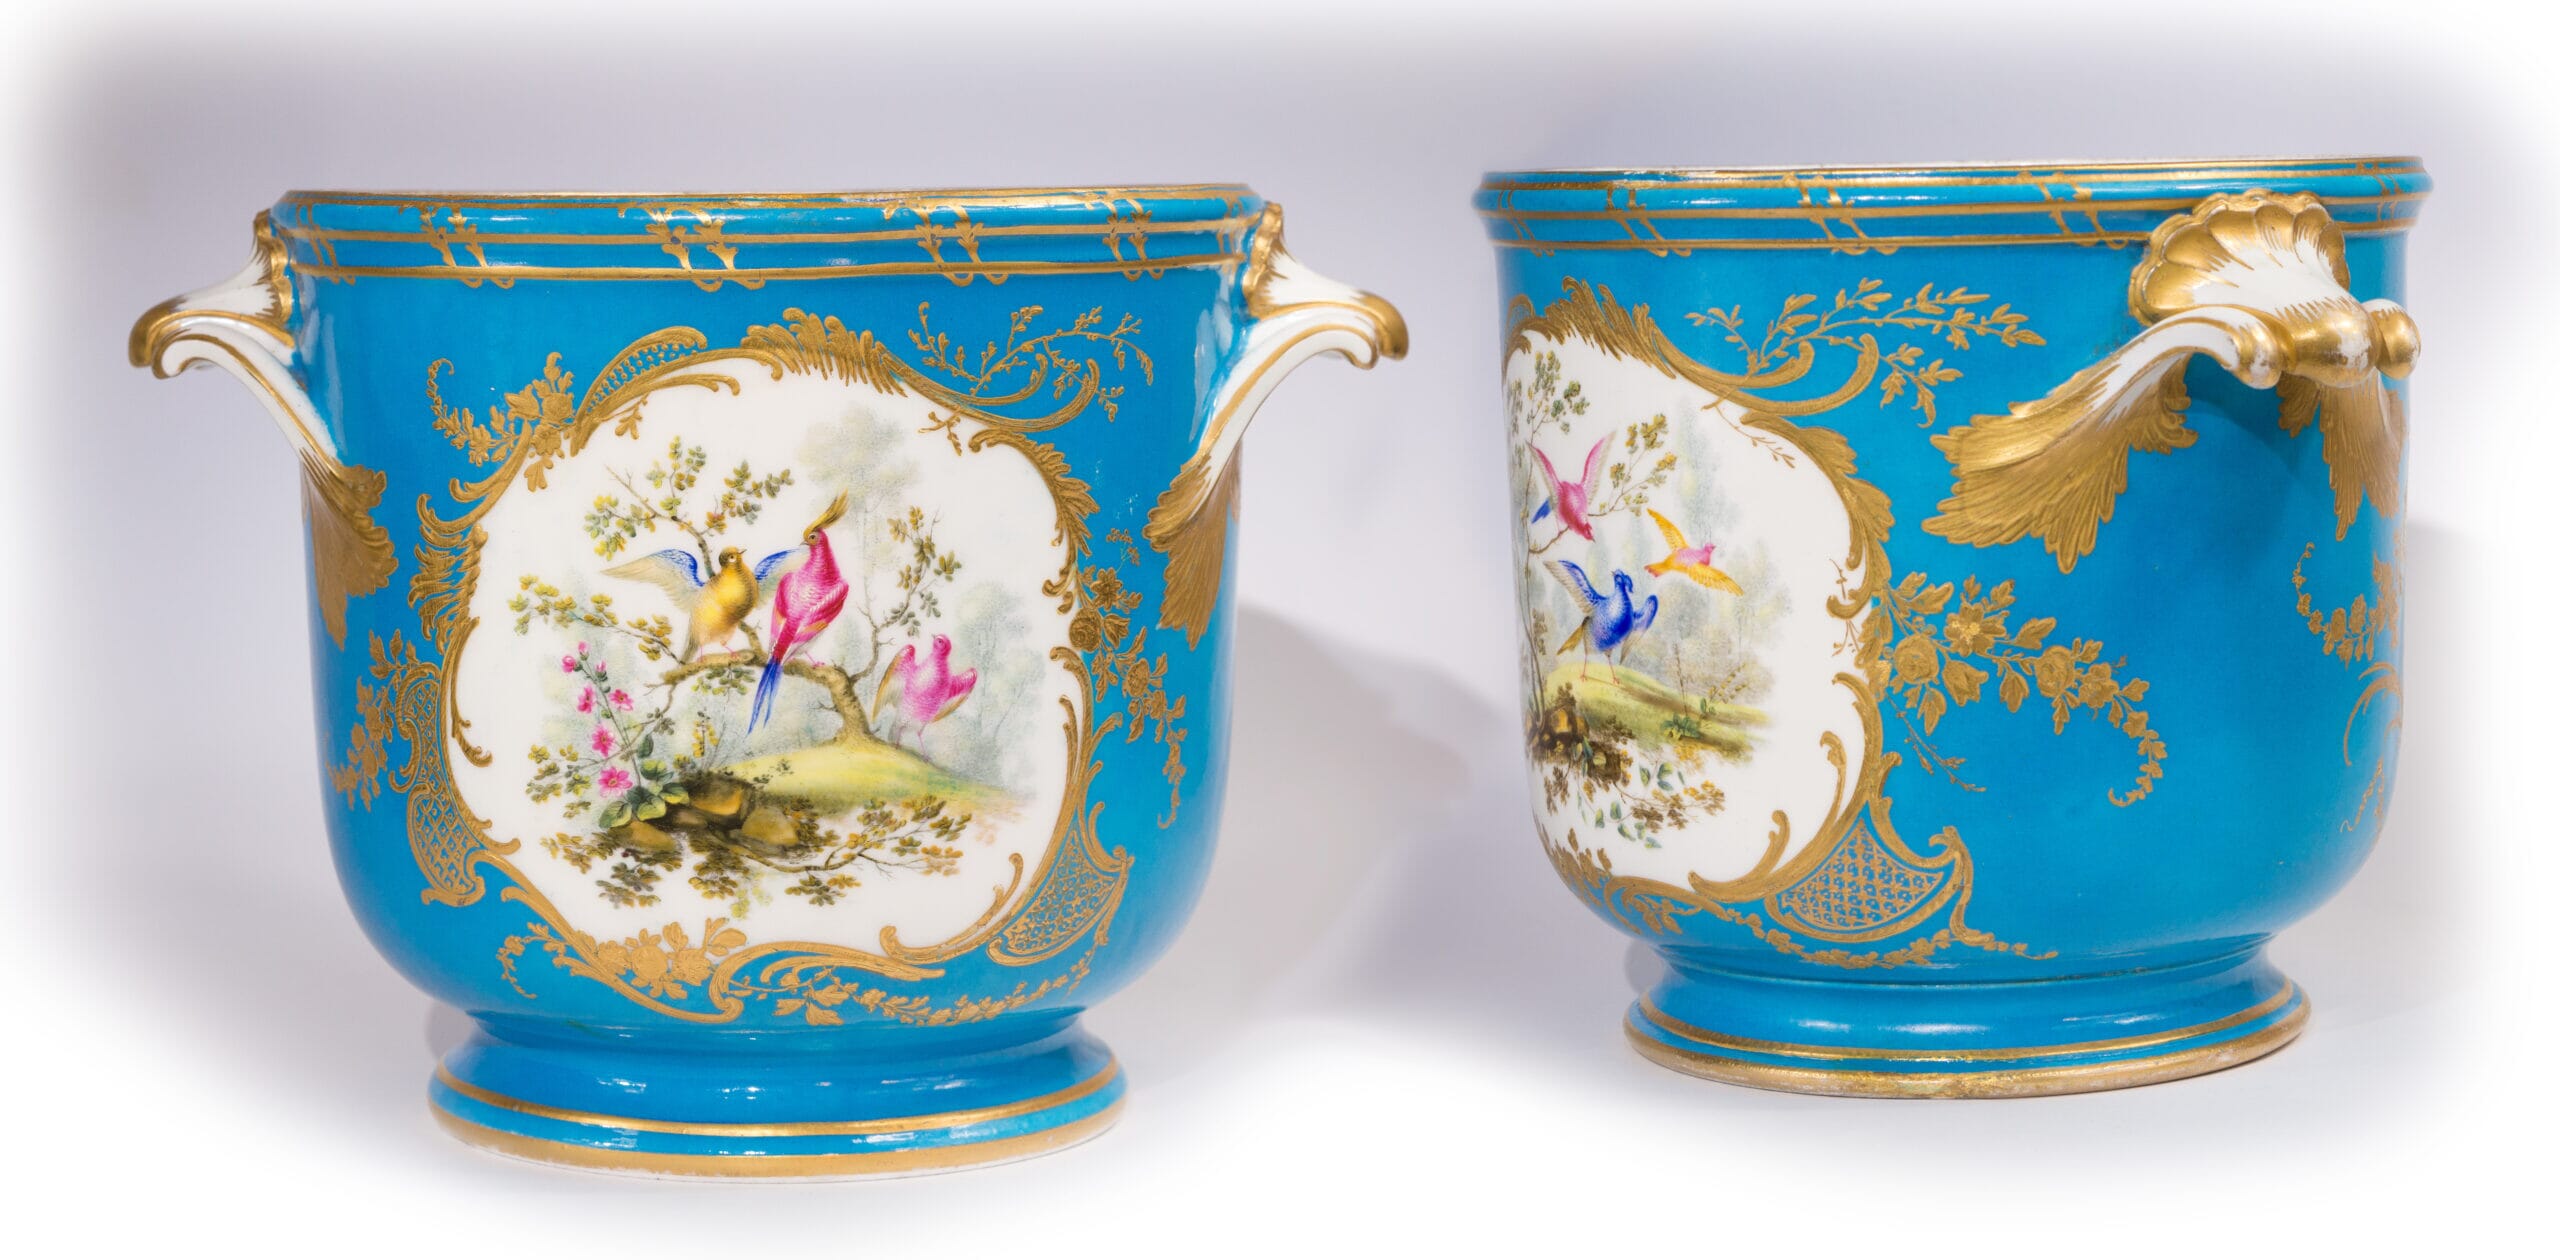 Sèvres bottle holders, painted in blue celeste with panels of fruit & flowers, Randall, 18th c & mid 19th c.-0